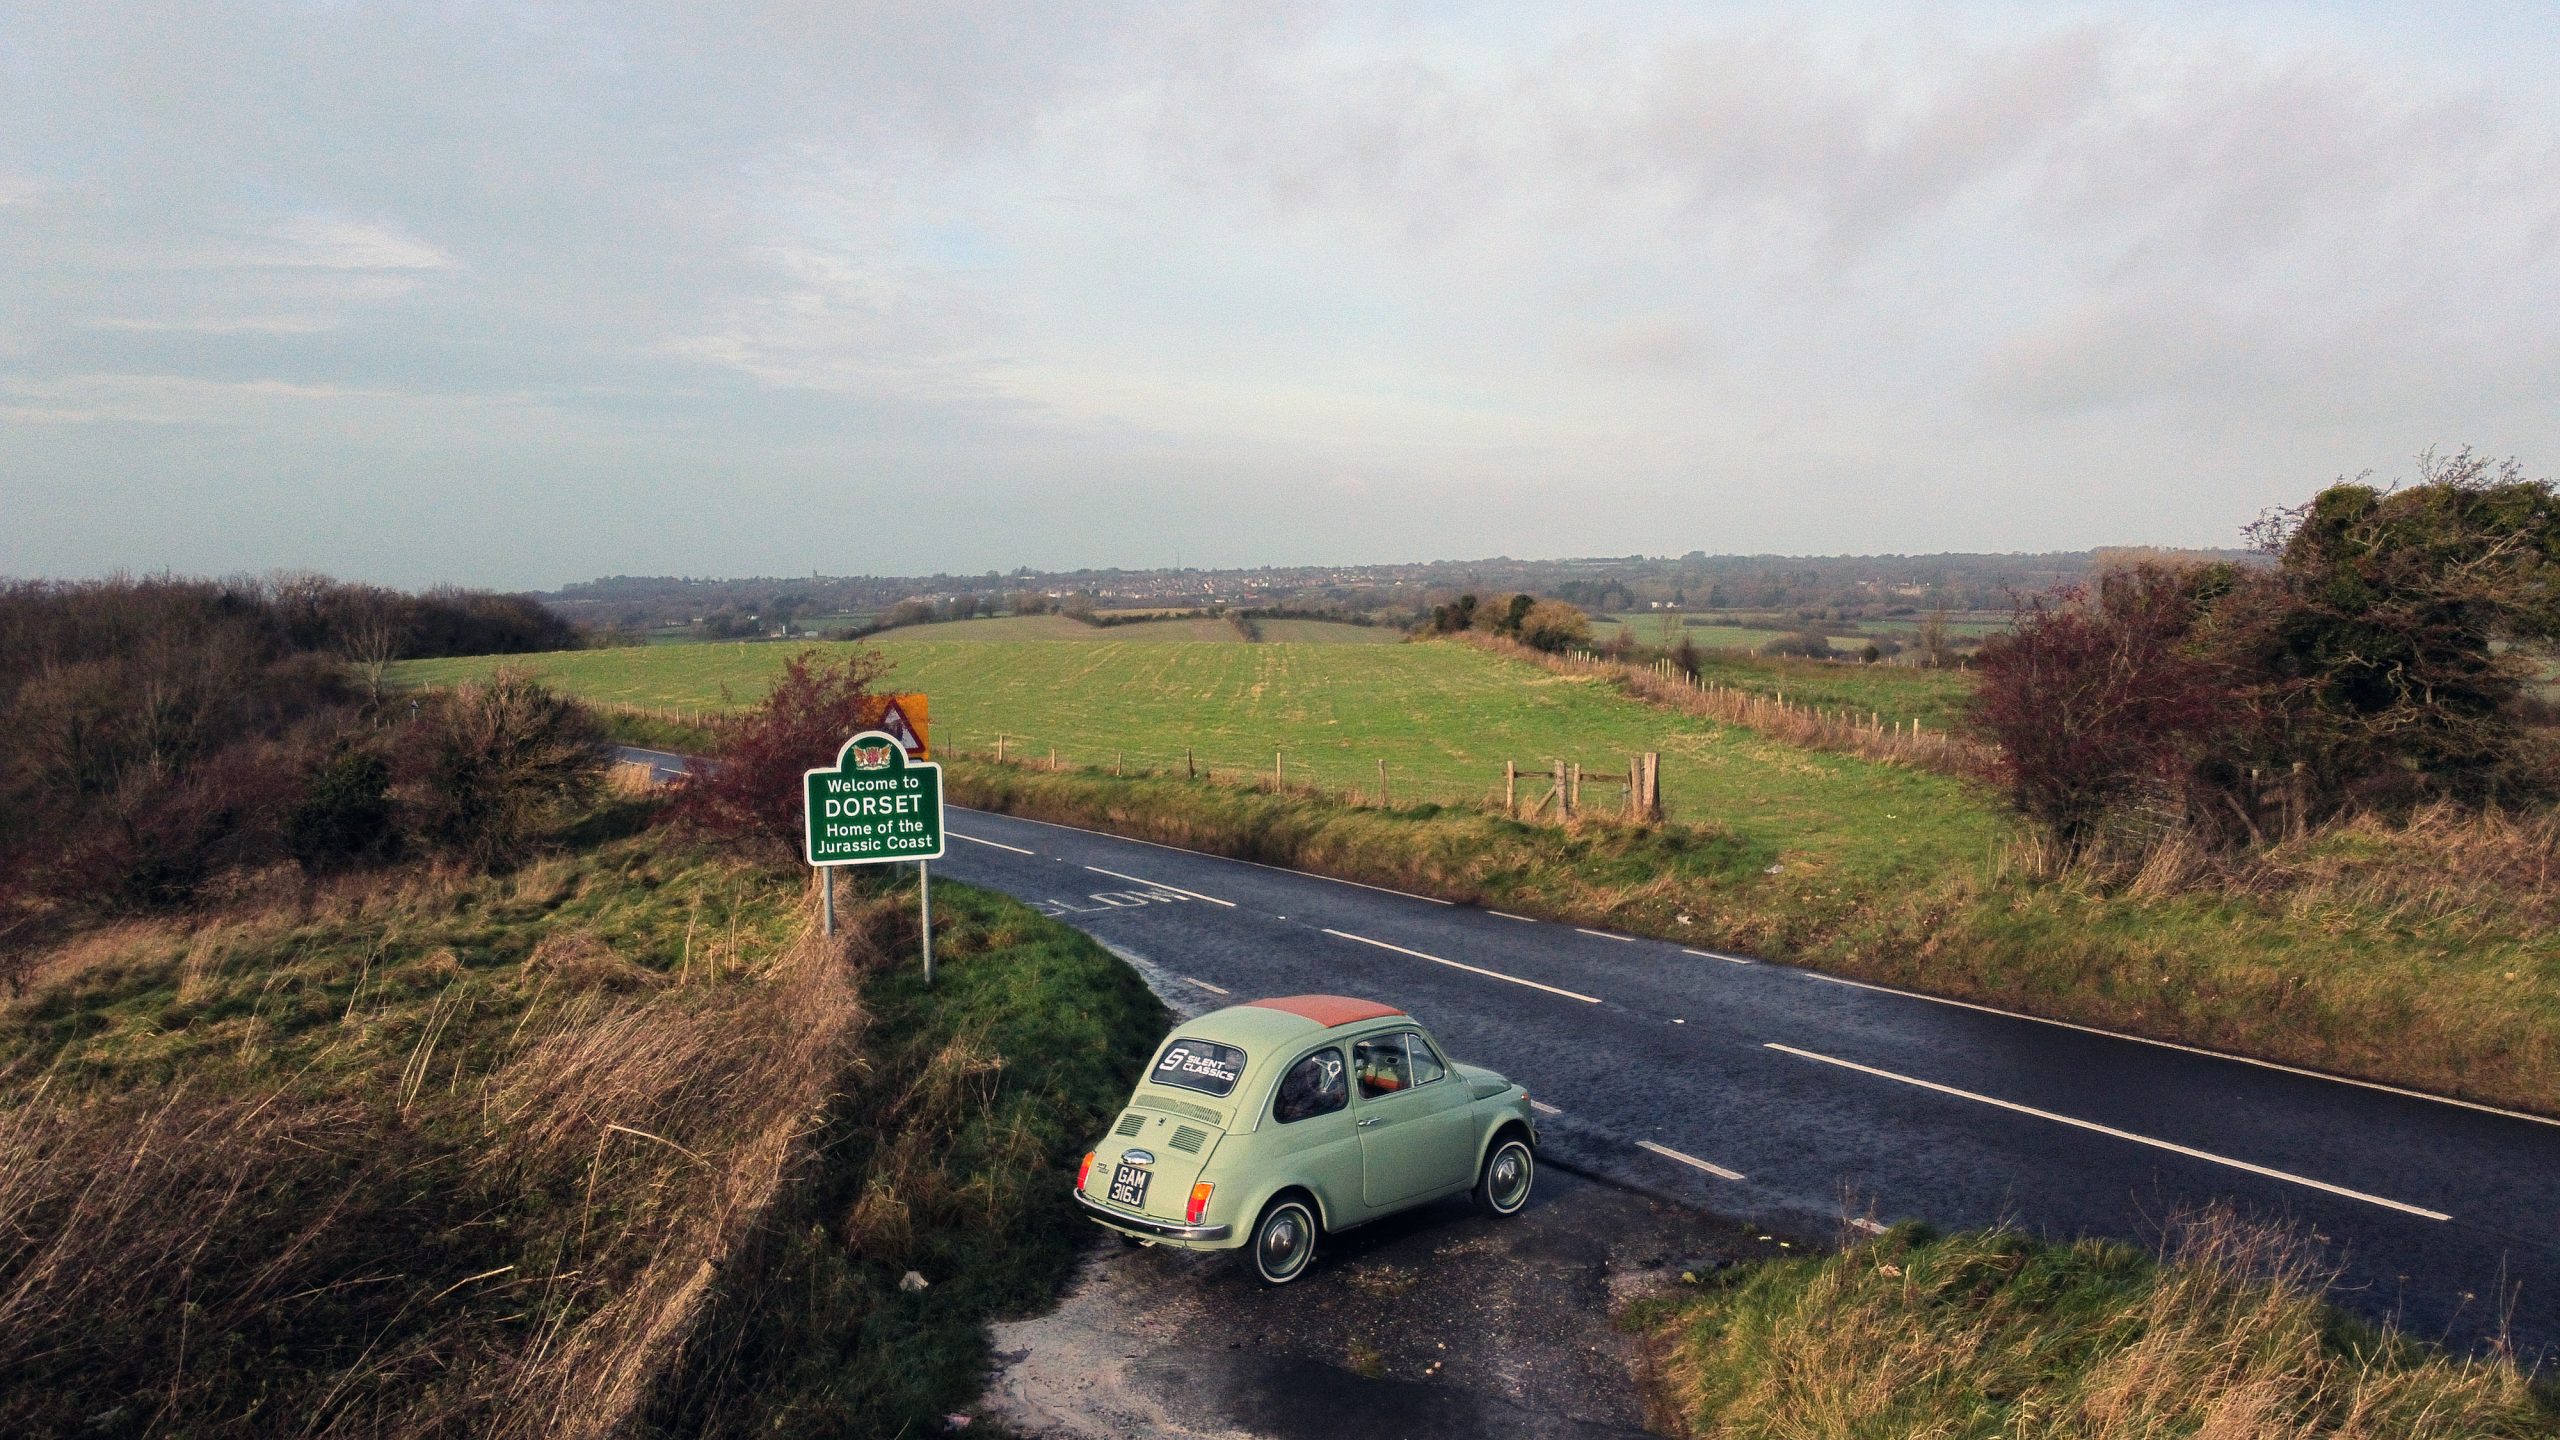 On the road in a very small, very silent Fiat 500